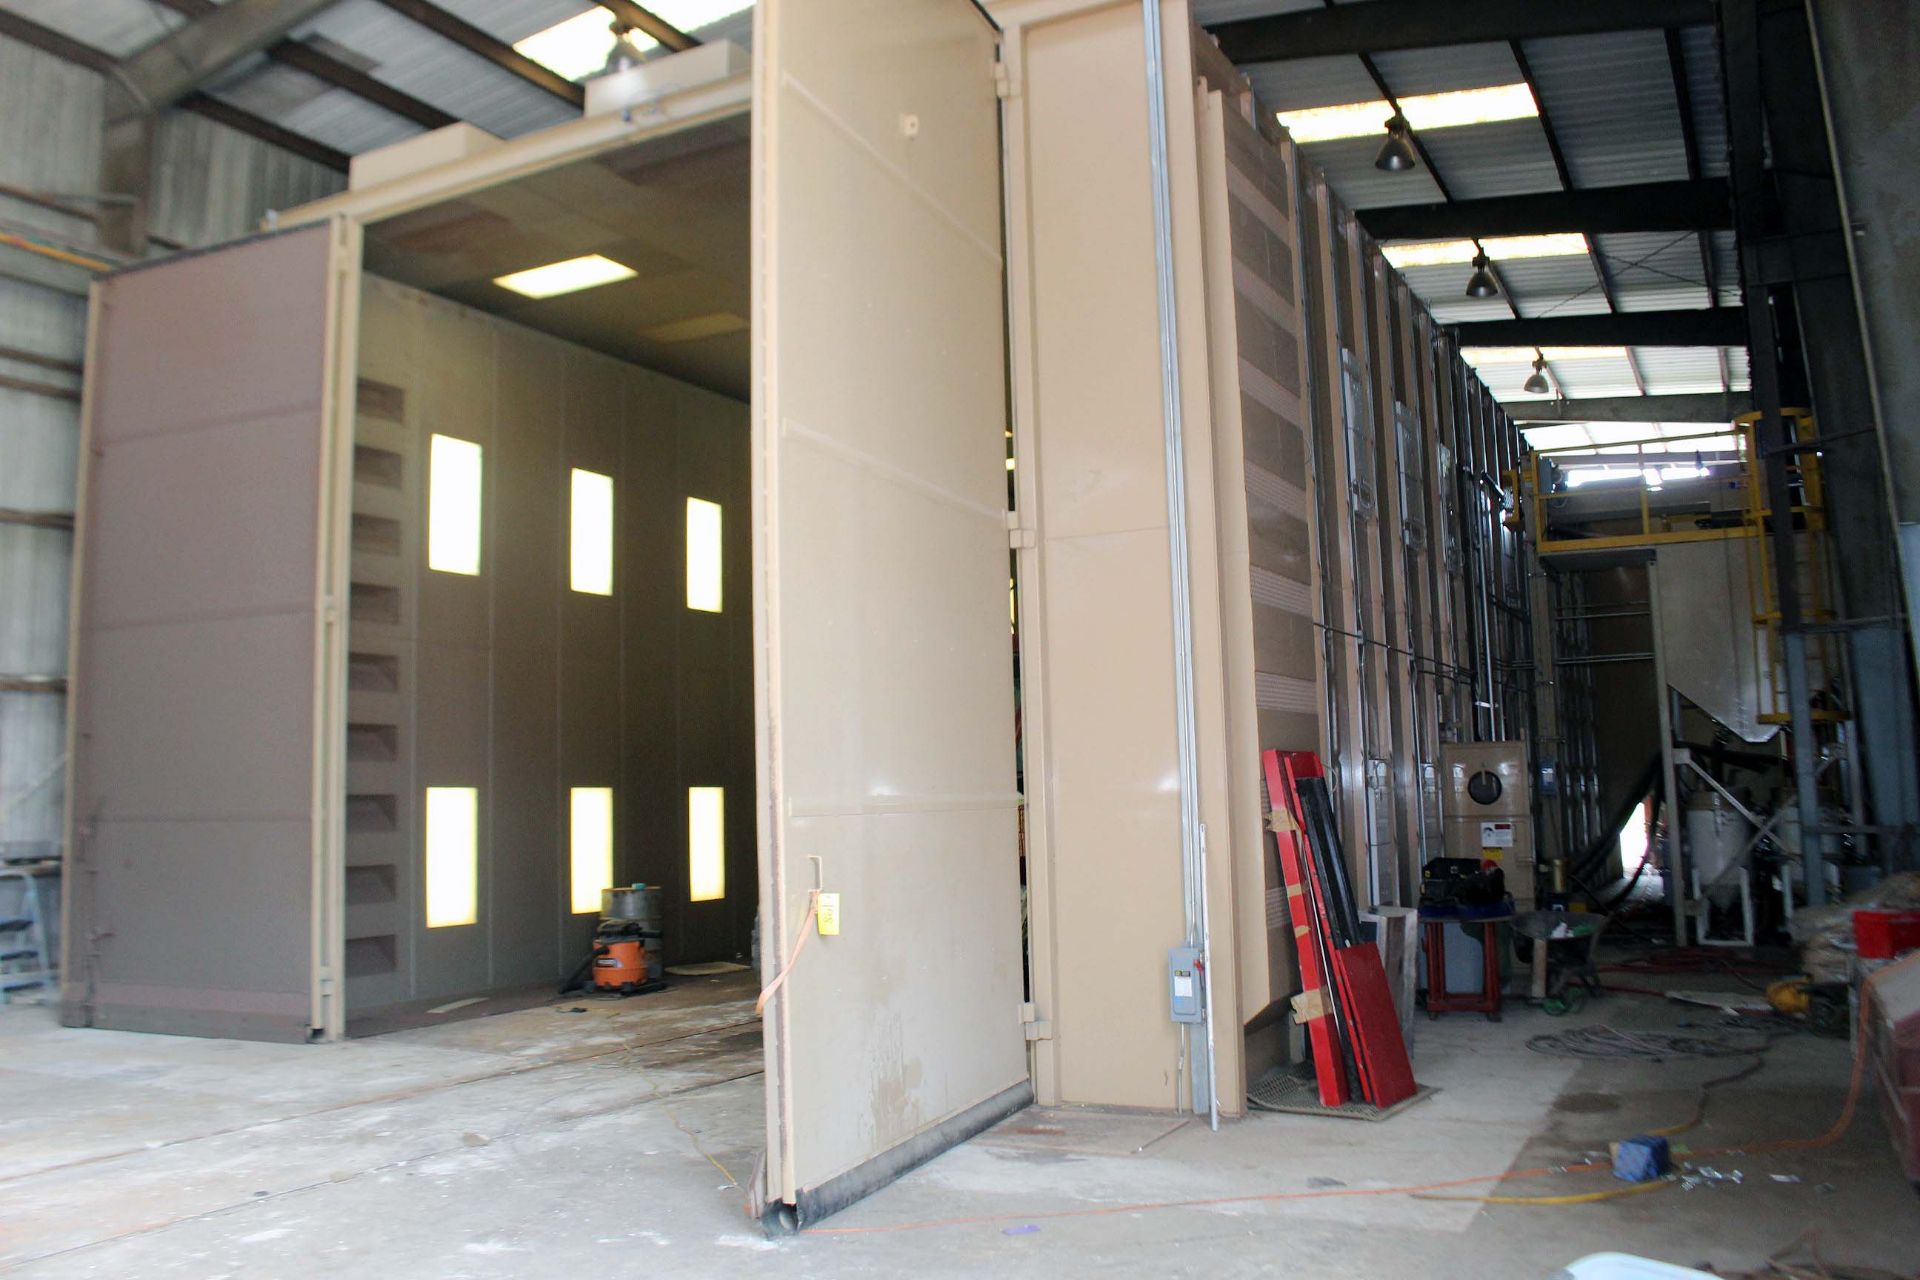 BLAST BOOTH, ABRASIVE BLAST SYSTEMS, new 2014, 70'L. x 20'H. x 18'W. opening, pass through style,